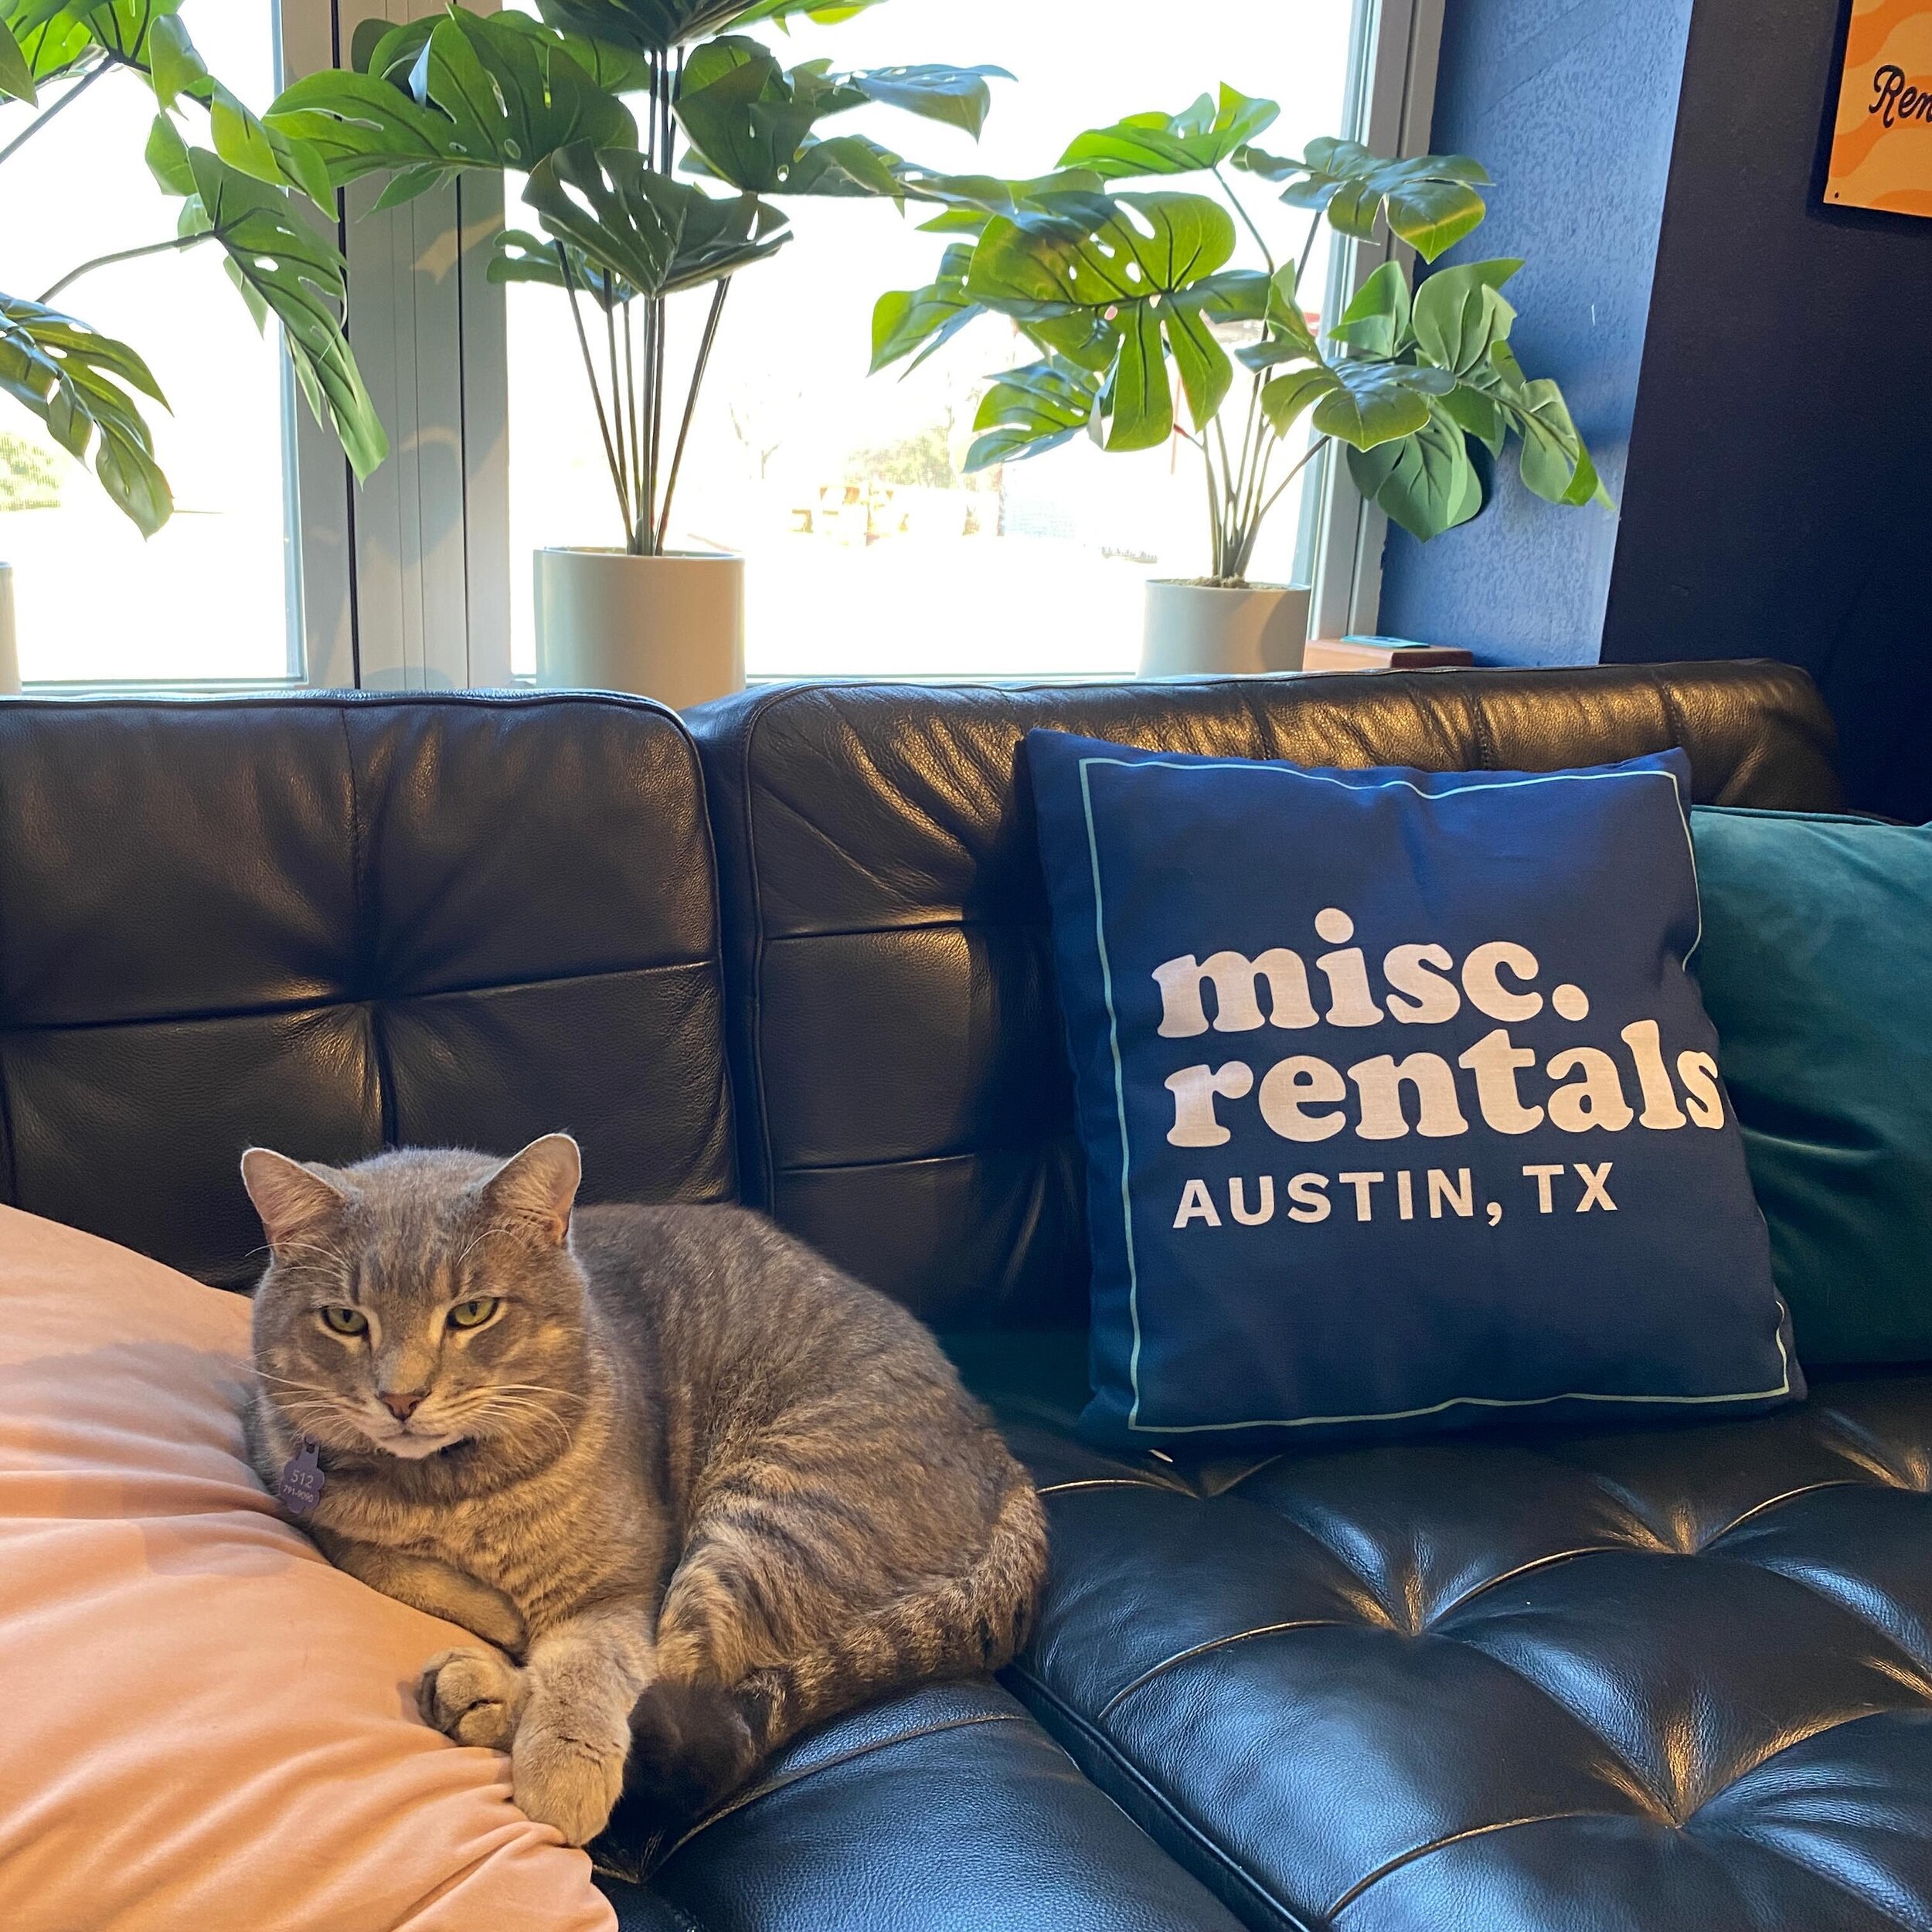 A little Friday dopamine boost featuring everyone&rsquo;s favorite shop cat and the cutest pillow our sweet friends just gave us. 

💙💙💙